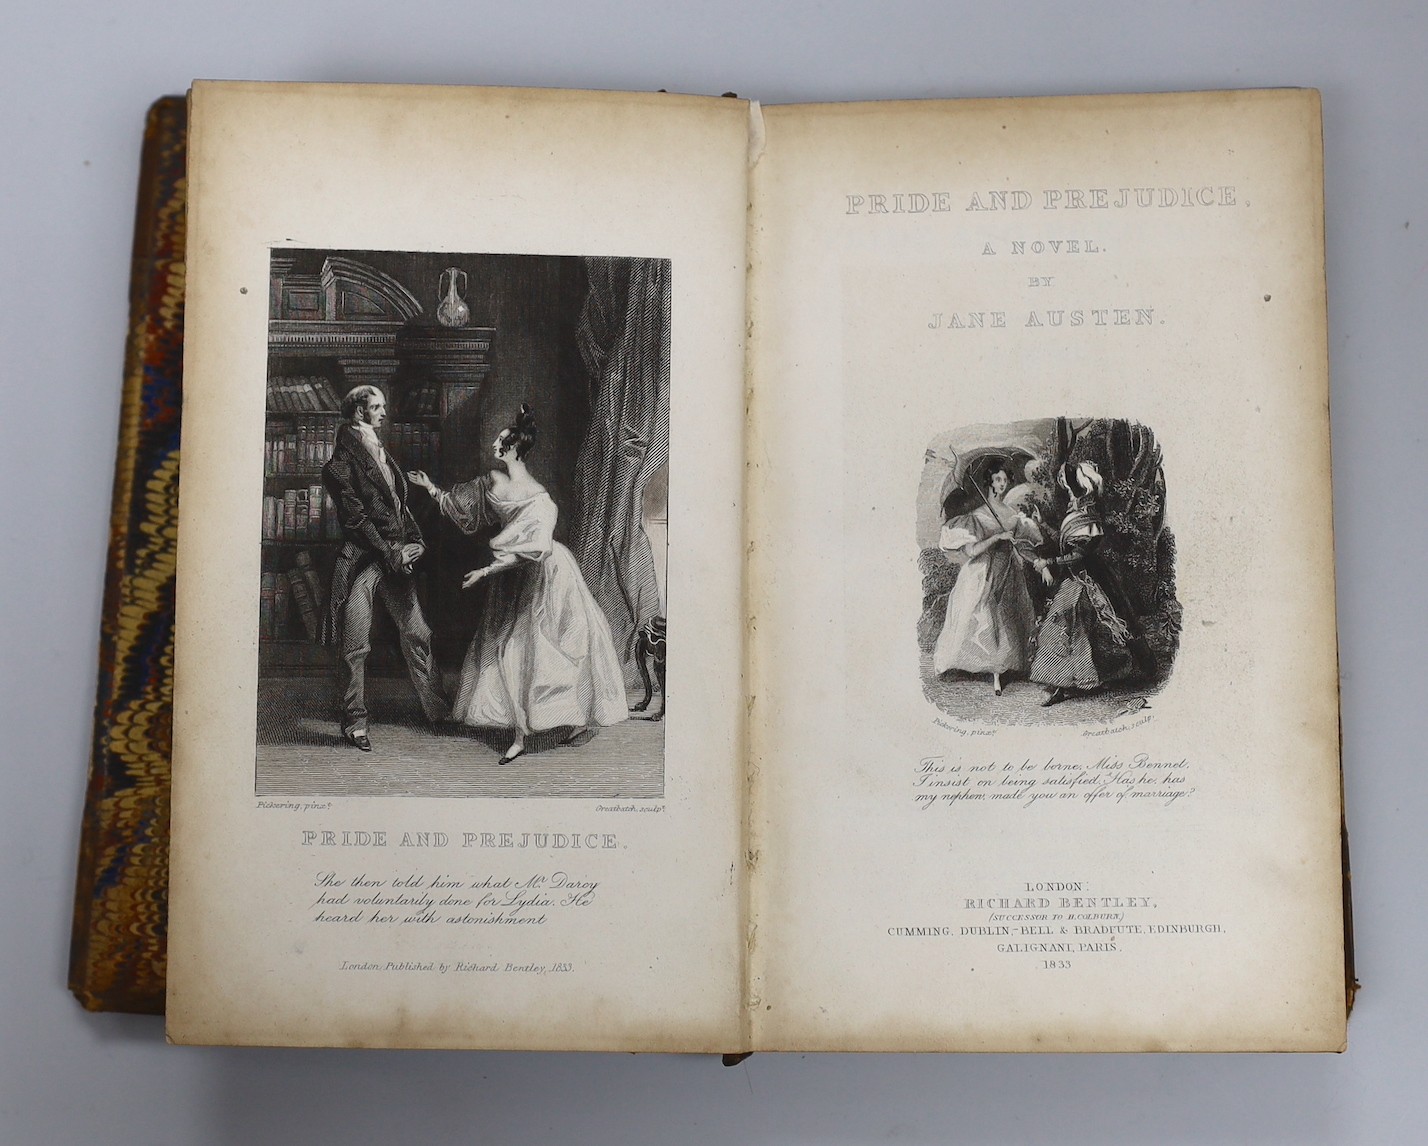 Austen, Jane - Pride and Prejudice. A Novel. First Collected Edition. pictorial engraved and printed titles, frontis; mid 19th century half calf and marbled boards, panelled spine with black label